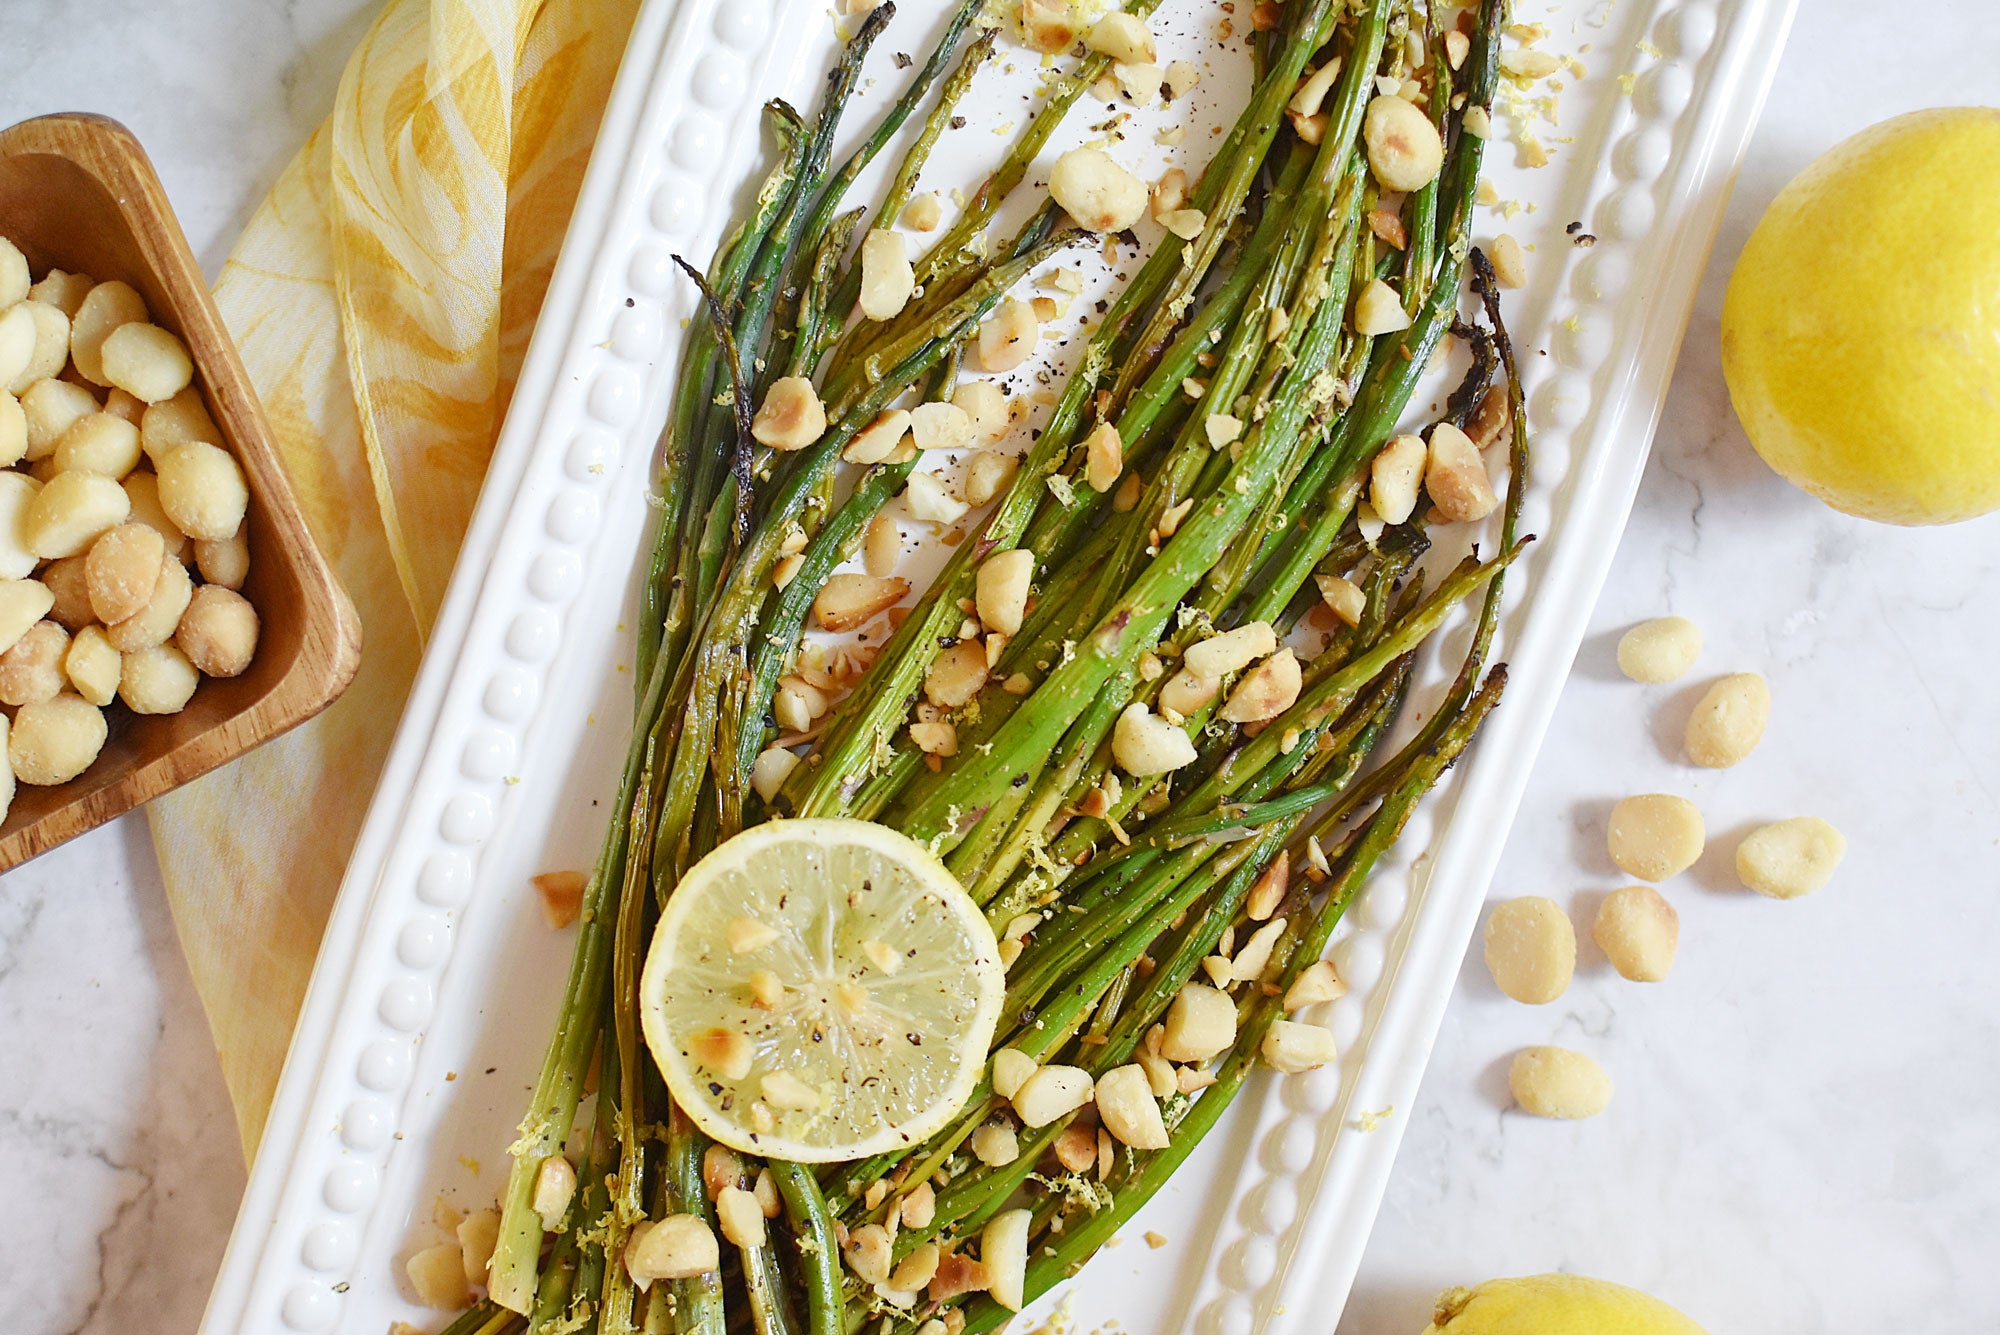 Baked Asparagus with Macadamia Nuts